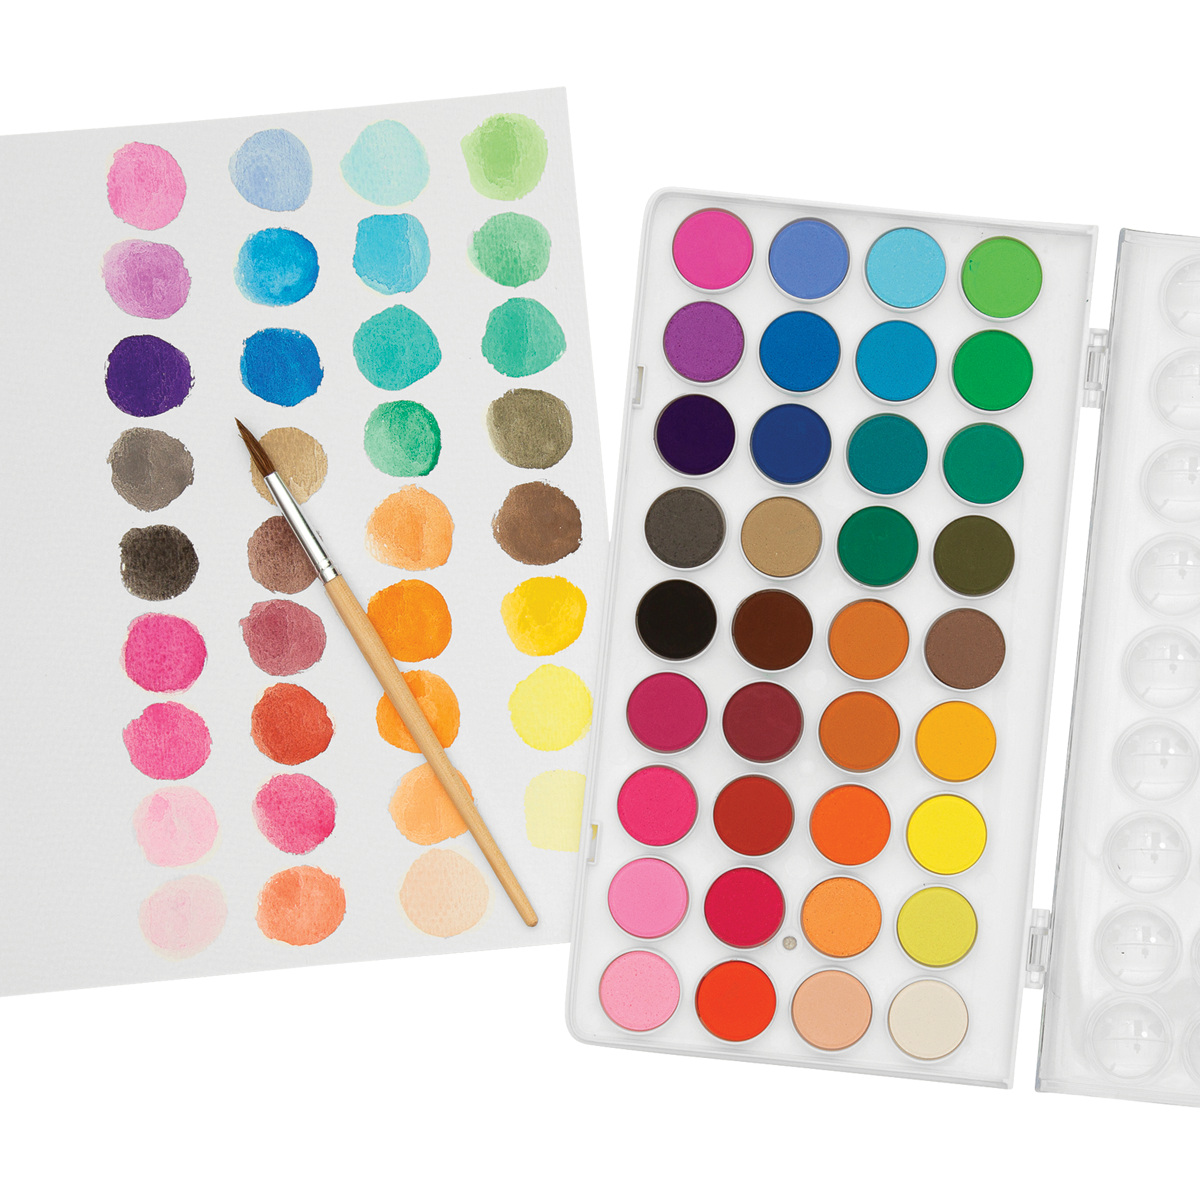 OOLY, Lil' Pods Watercolor with Brush, Watercolor Pack for Creative Kids  and Adults, Colorful and Washable Watercolors in a Portable Case, School  and